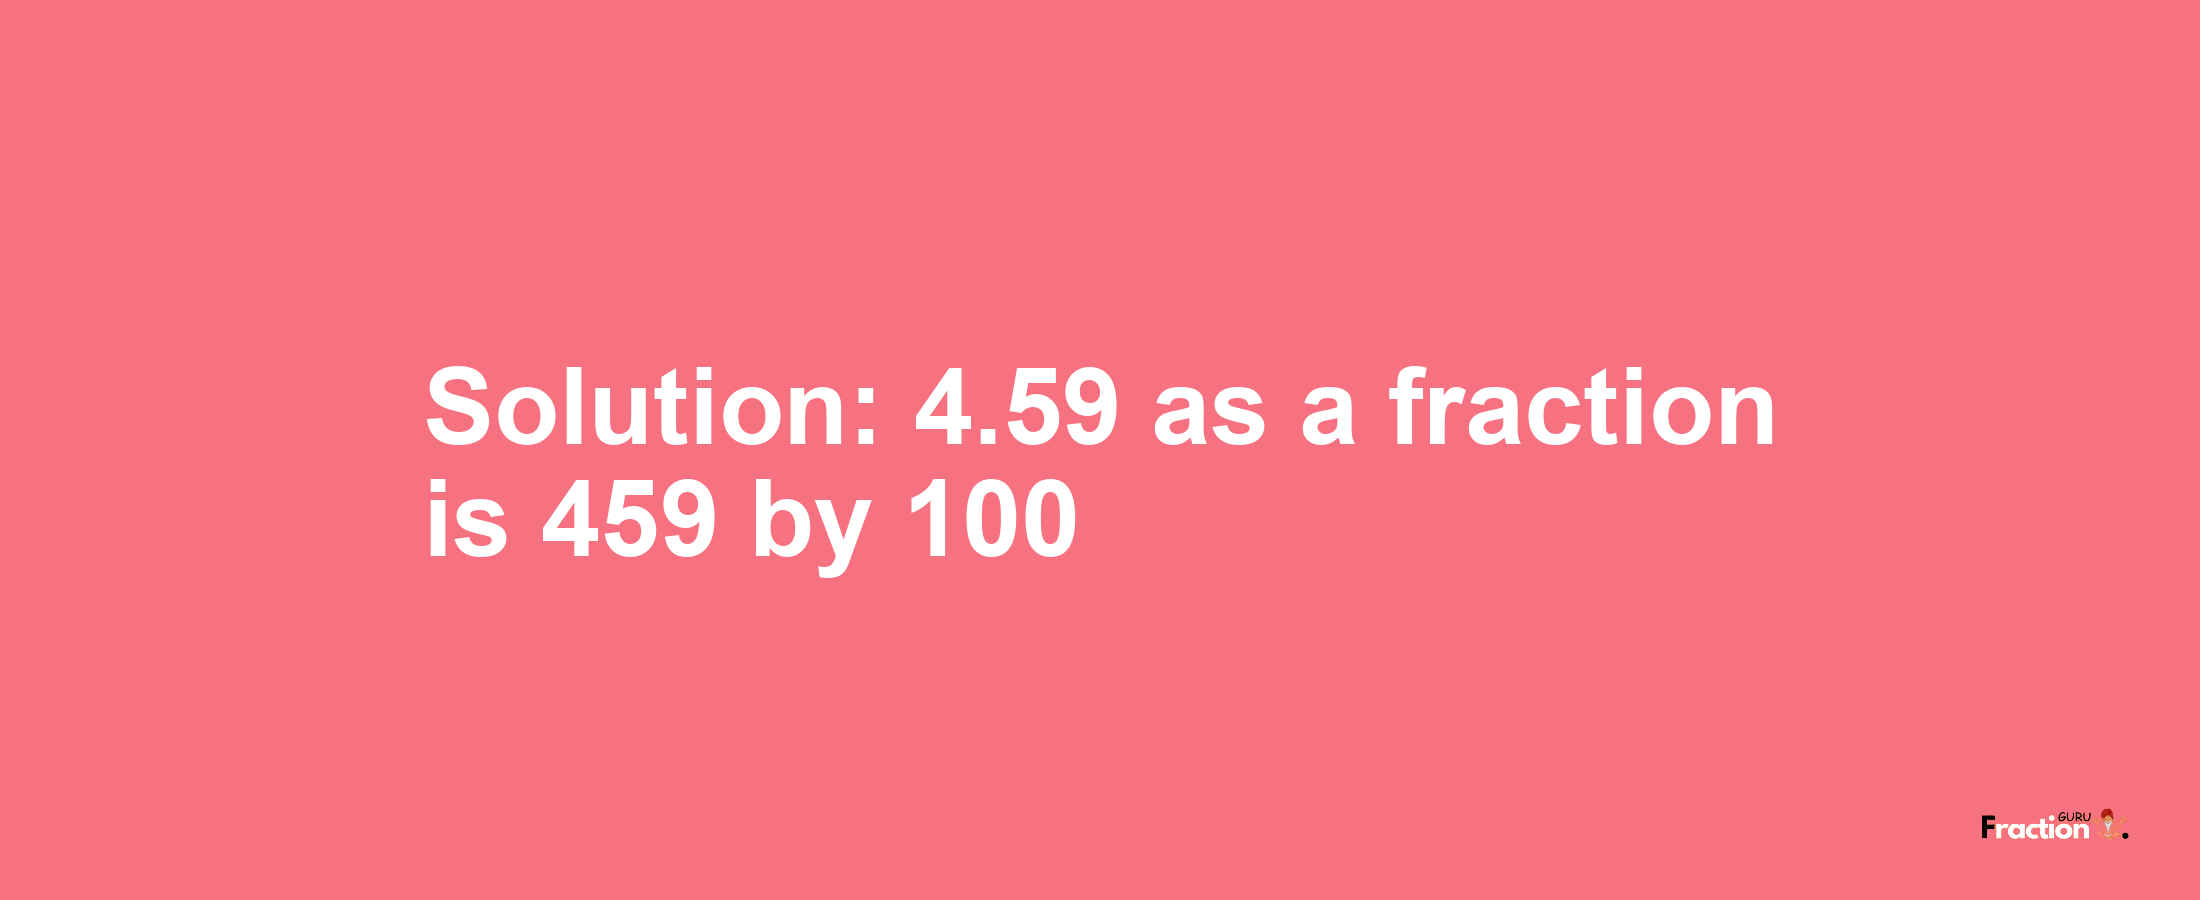 Solution:4.59 as a fraction is 459/100